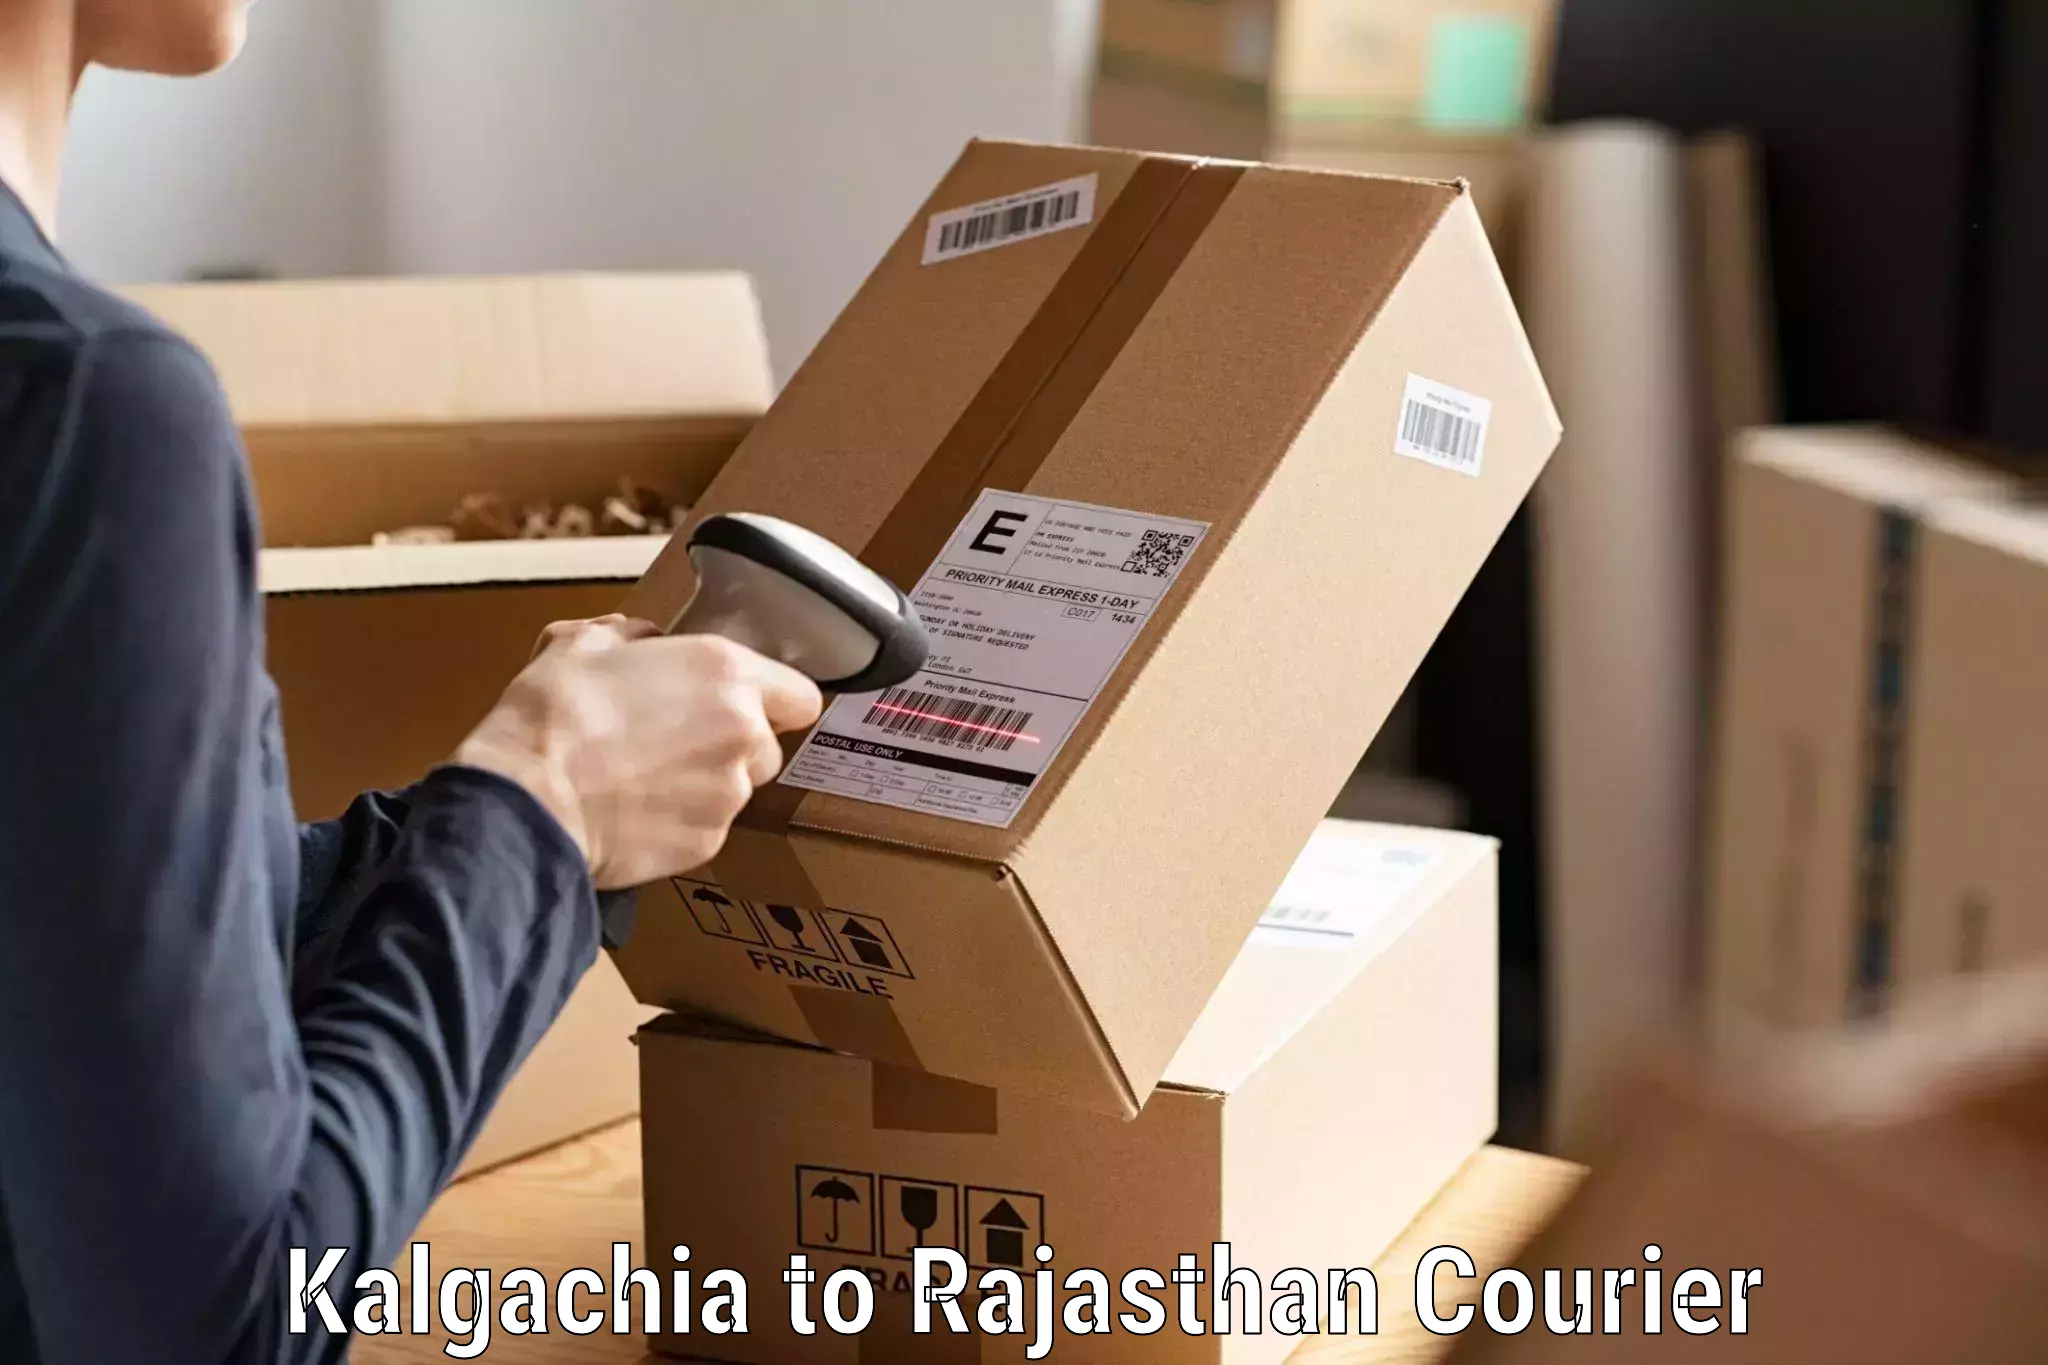 Local delivery service Kalgachia to Yeswanthapur